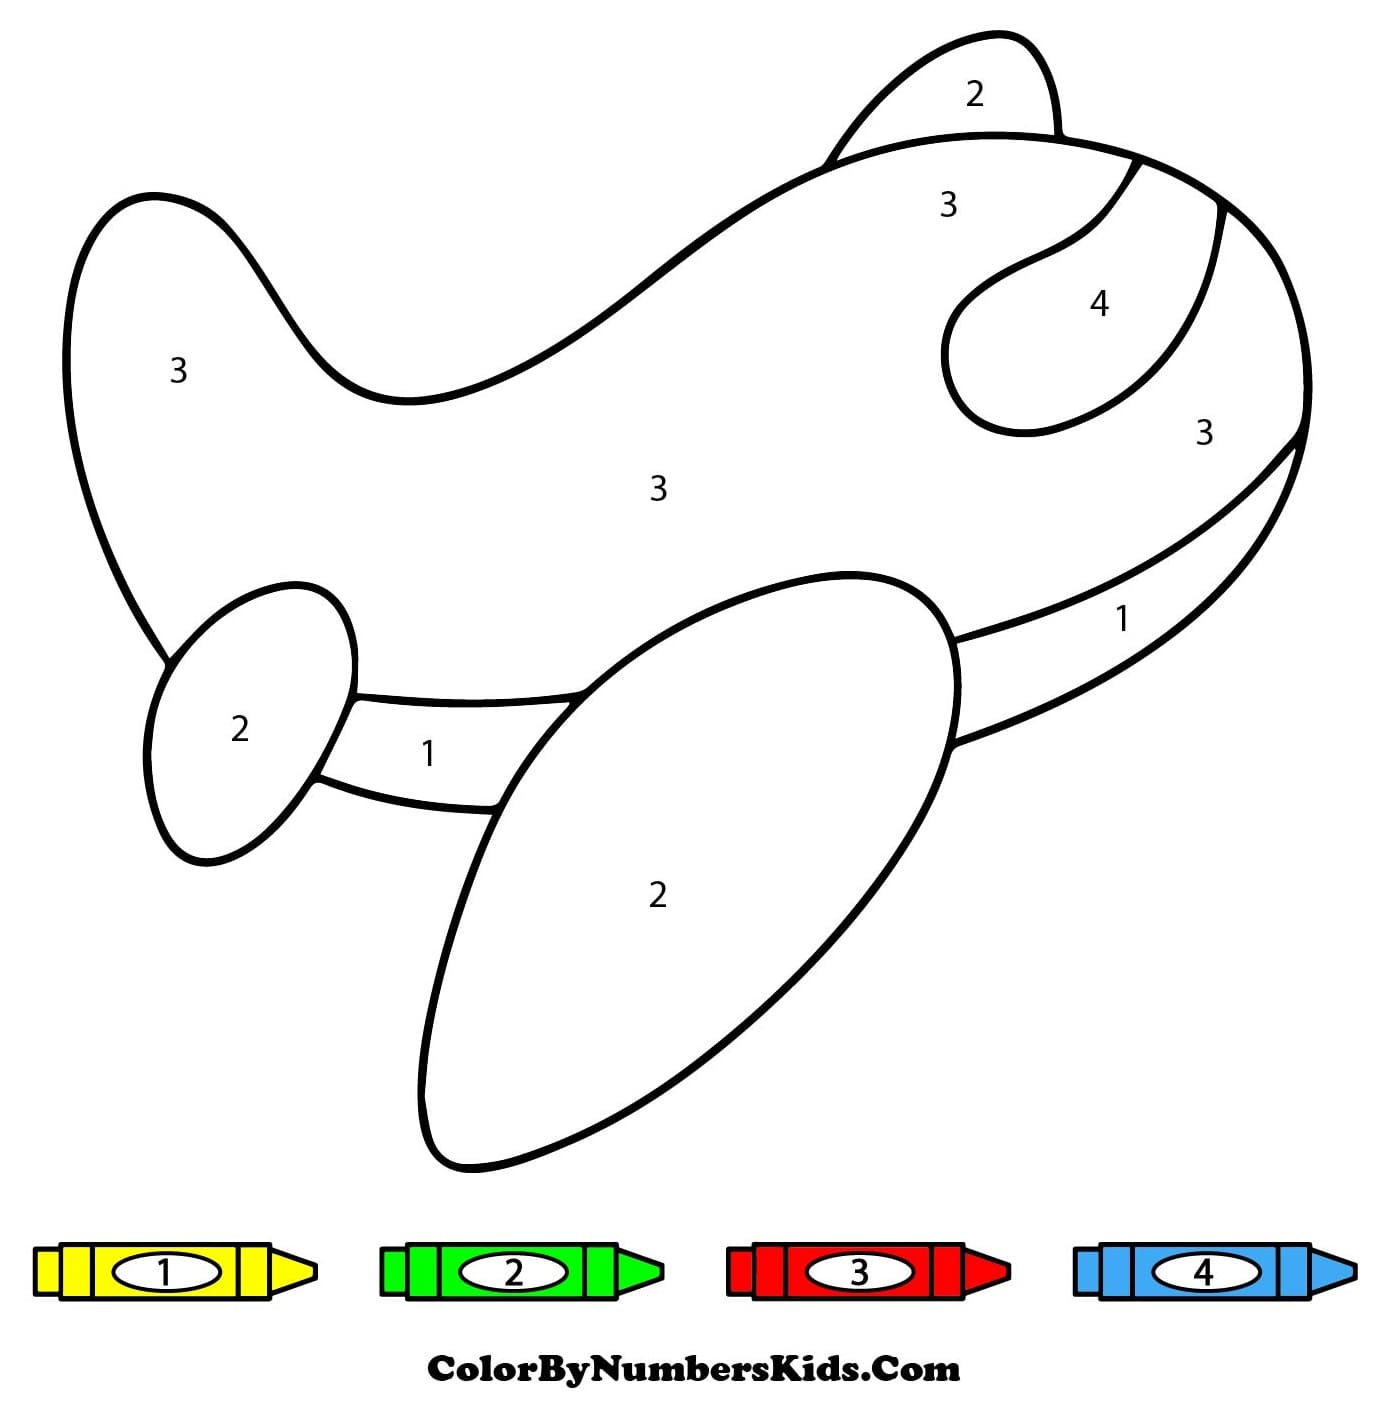 Cute Airplane Color By Number For Kids